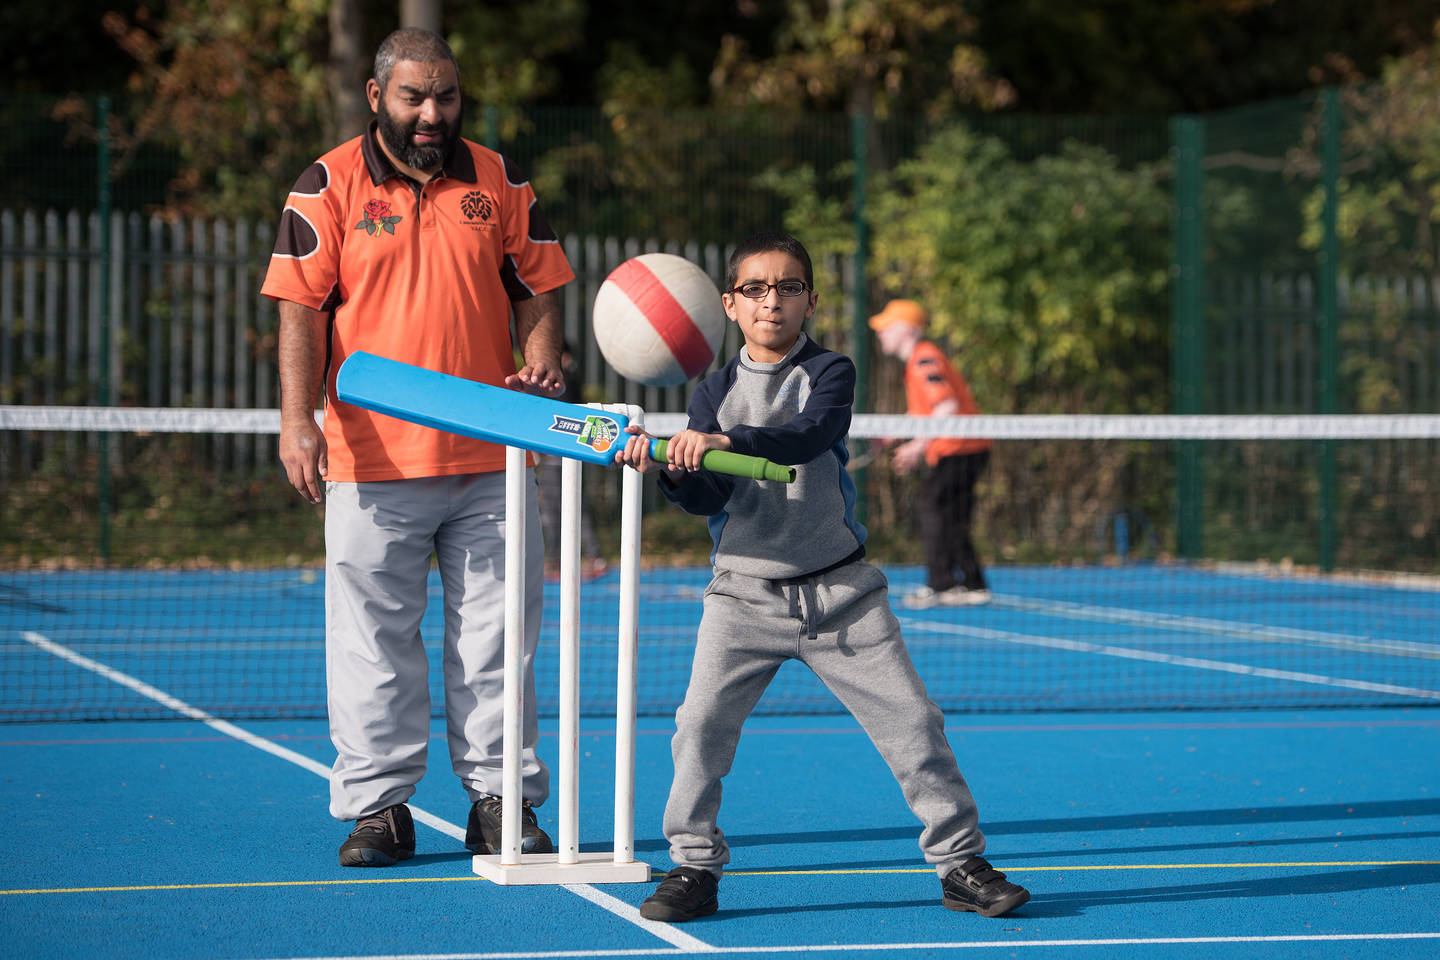 Young boy with visual impairment playing cricket